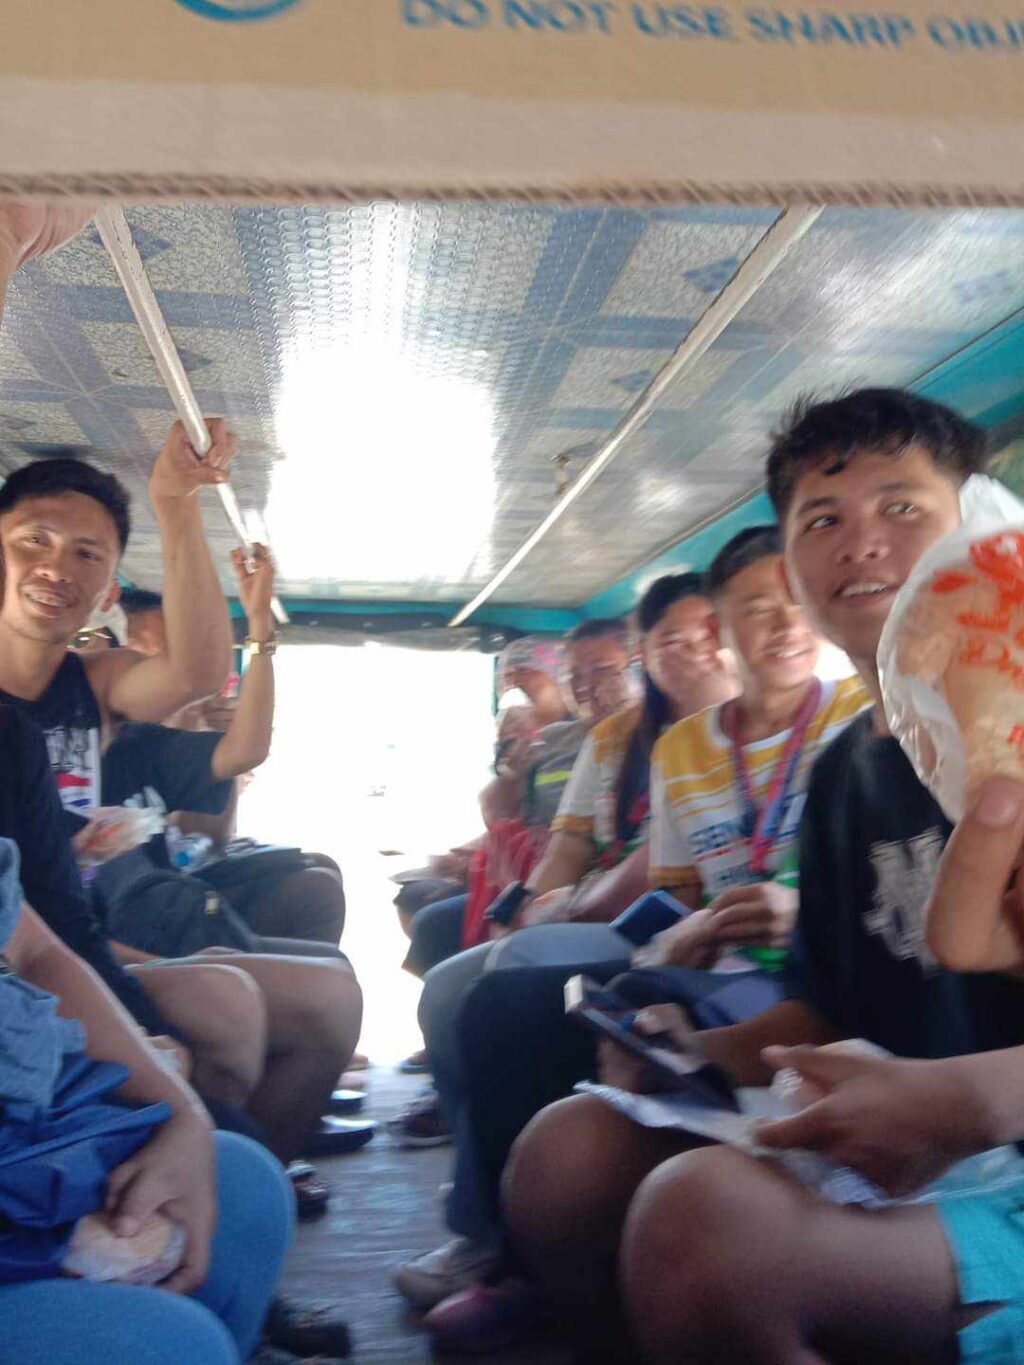 PUJ driver offers free rides, snacks to passengers on his birthday